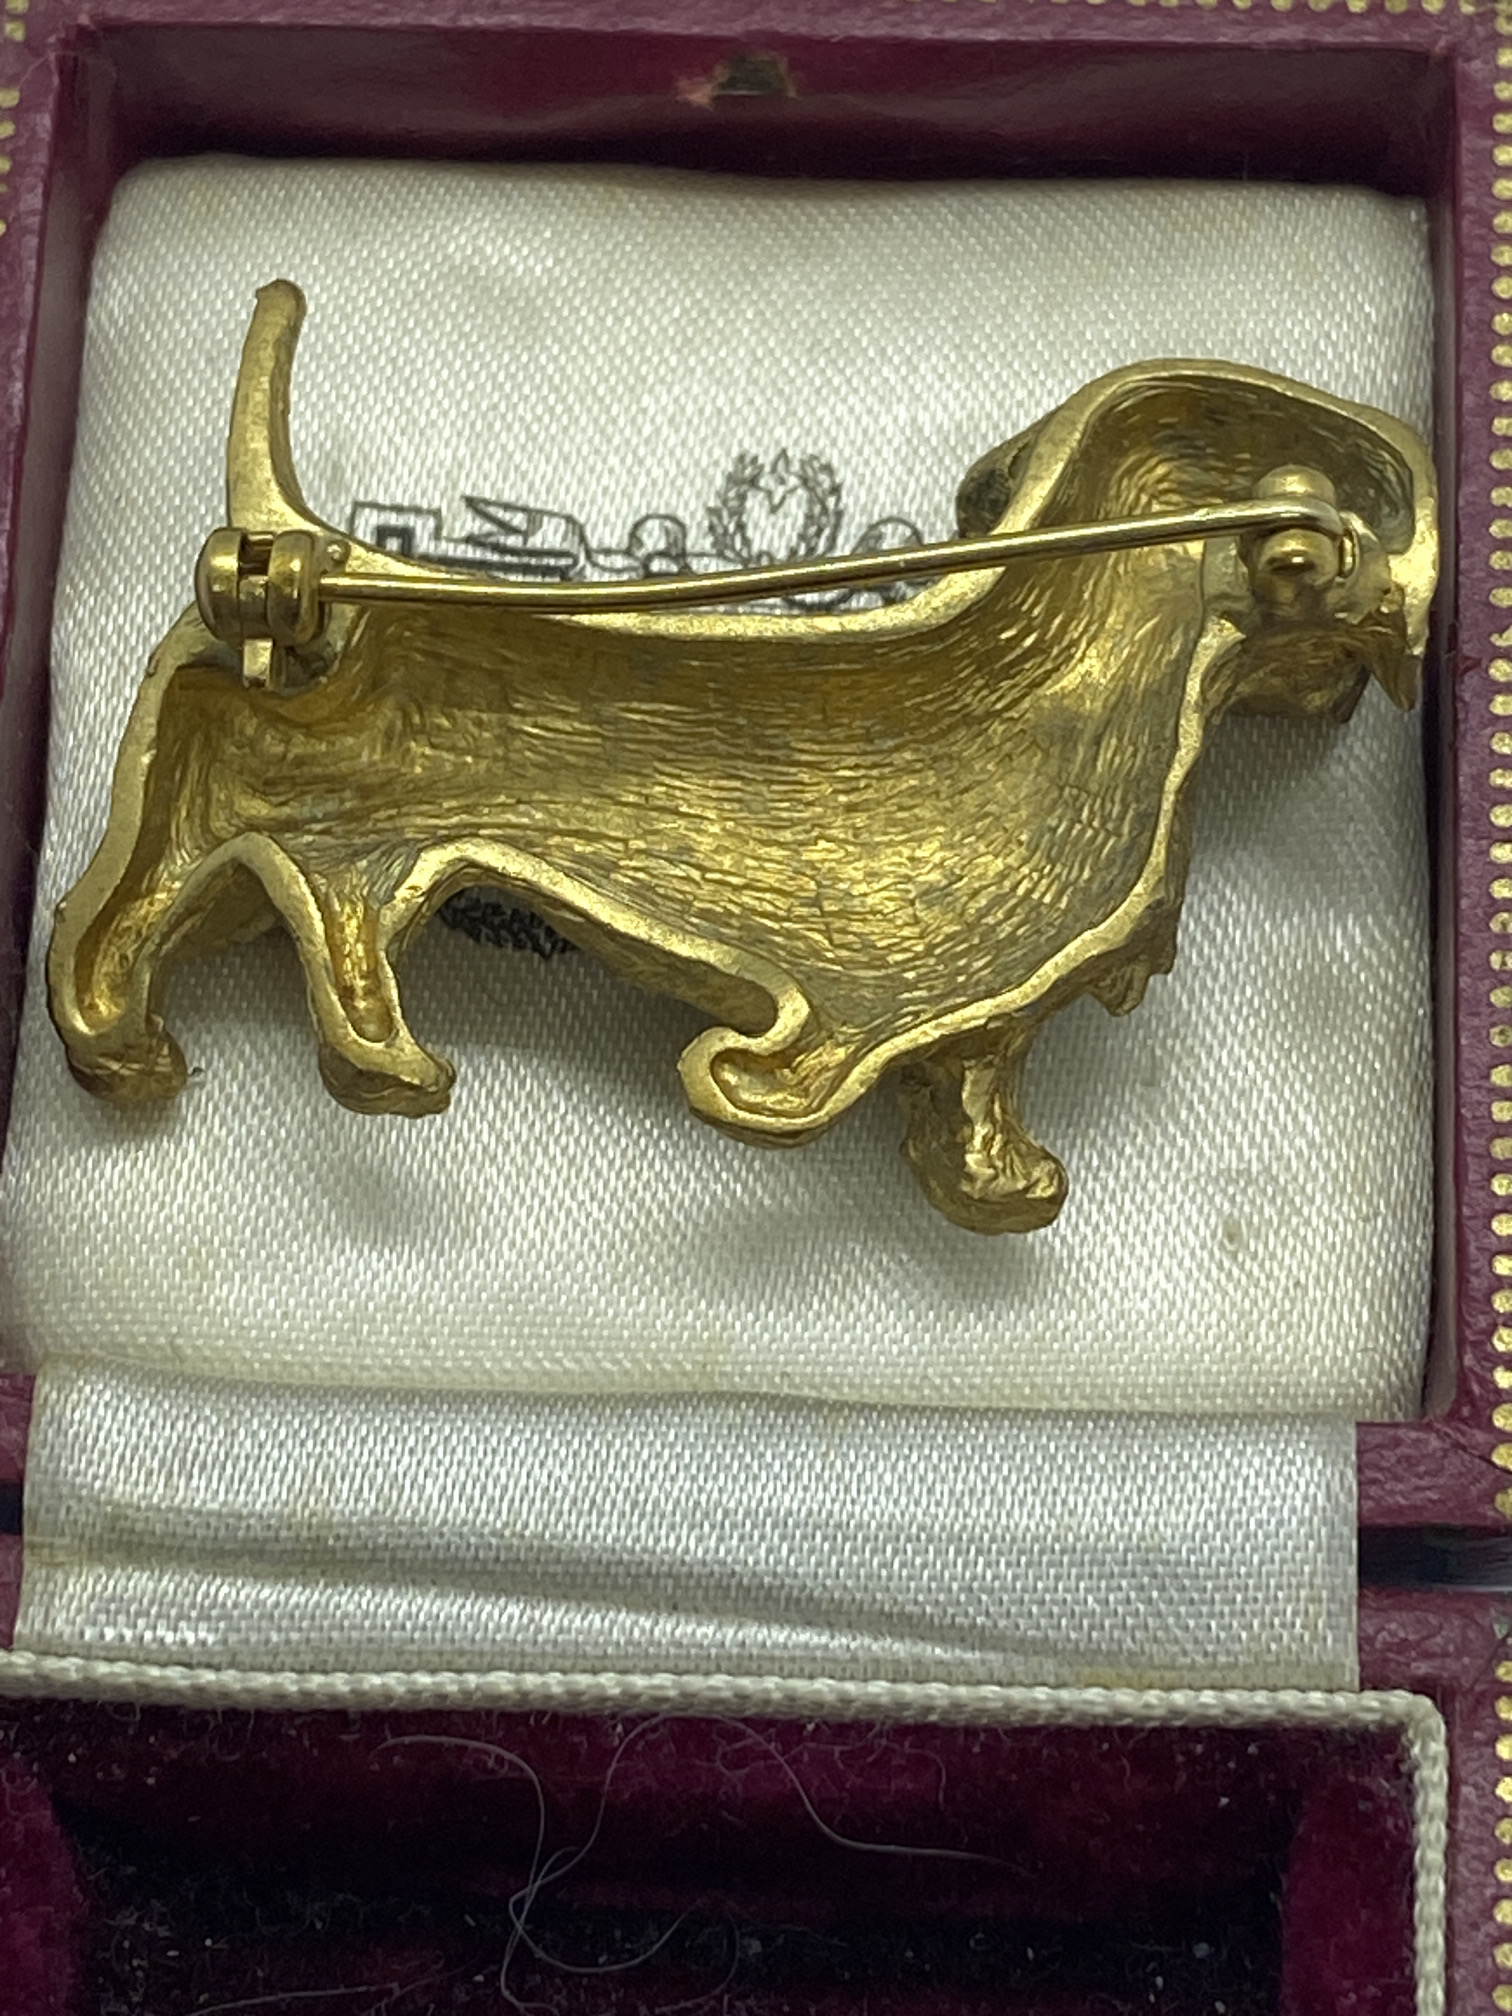 CUTE DACHSHUND DOG BROOCH CAST IN YELLOW METAL - Image 2 of 2